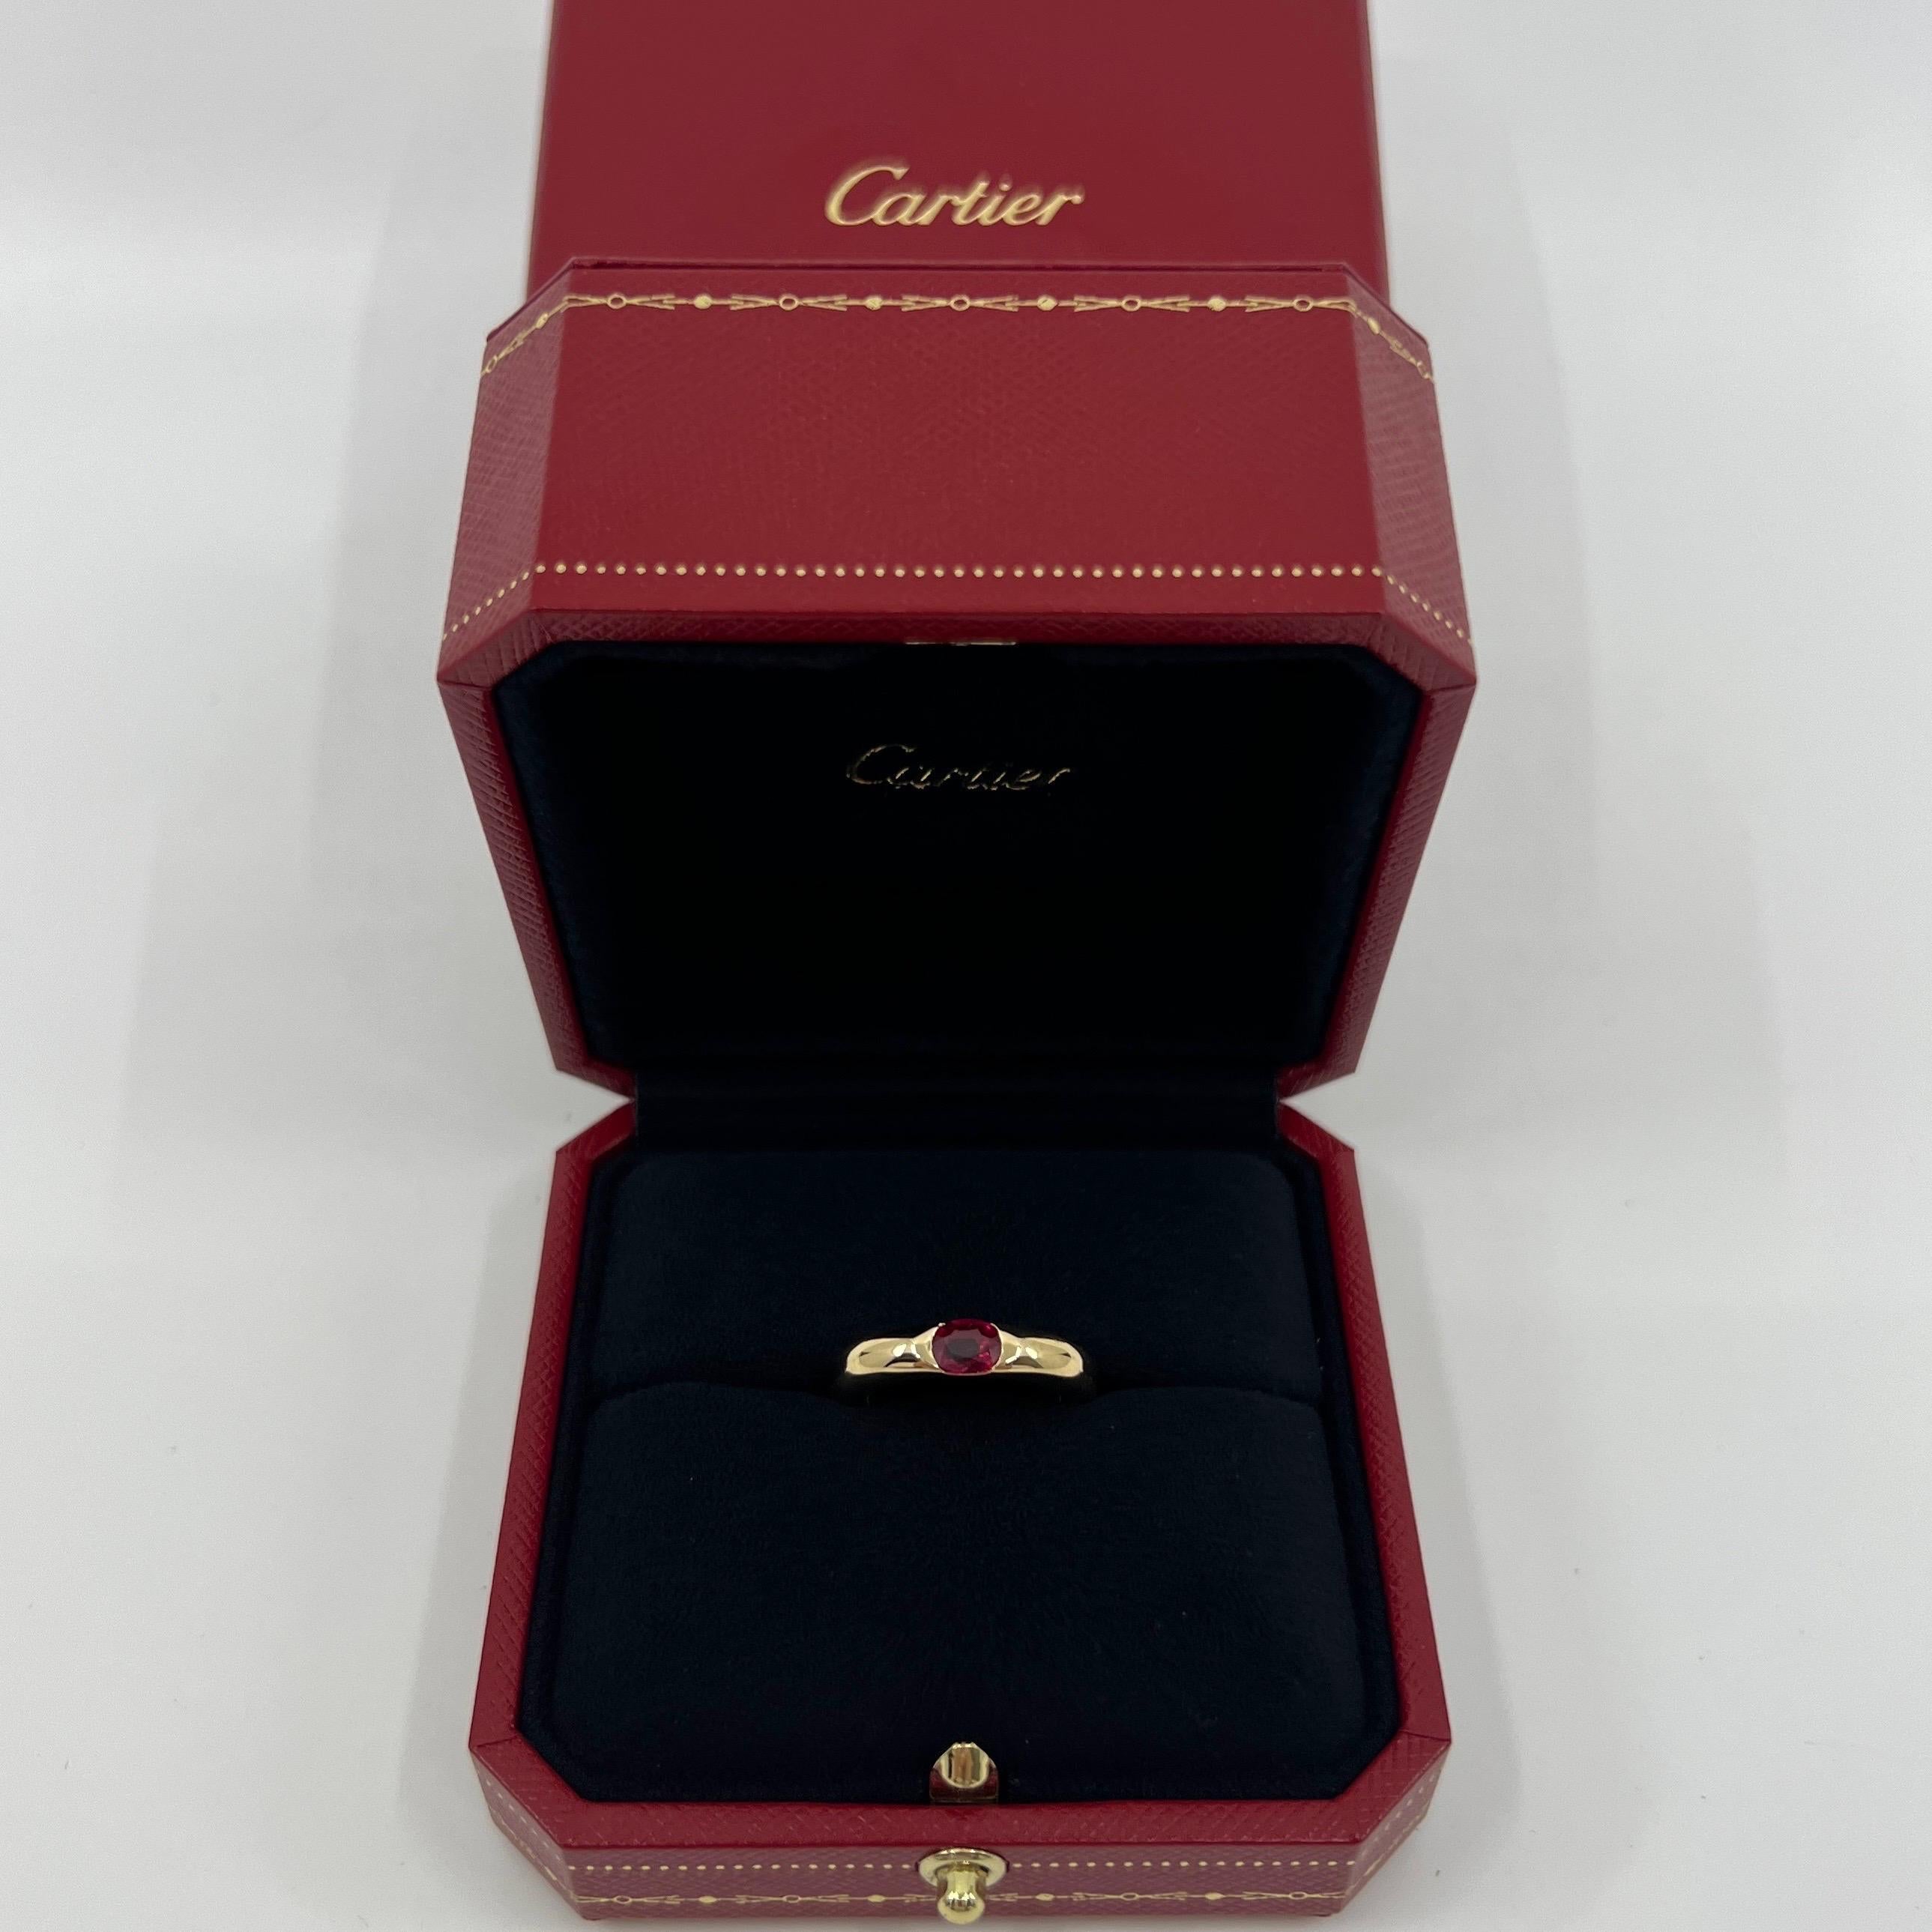 Vintage Cartier Deep Red Ruby 18k Yellow Gold Solitaire Band Ring.

Stunning yellow gold ring set with a vivid pink red ruby. Fine jewellery houses like Cartier only use the finest of gemstones and this ruby is no exception. An excellent quality